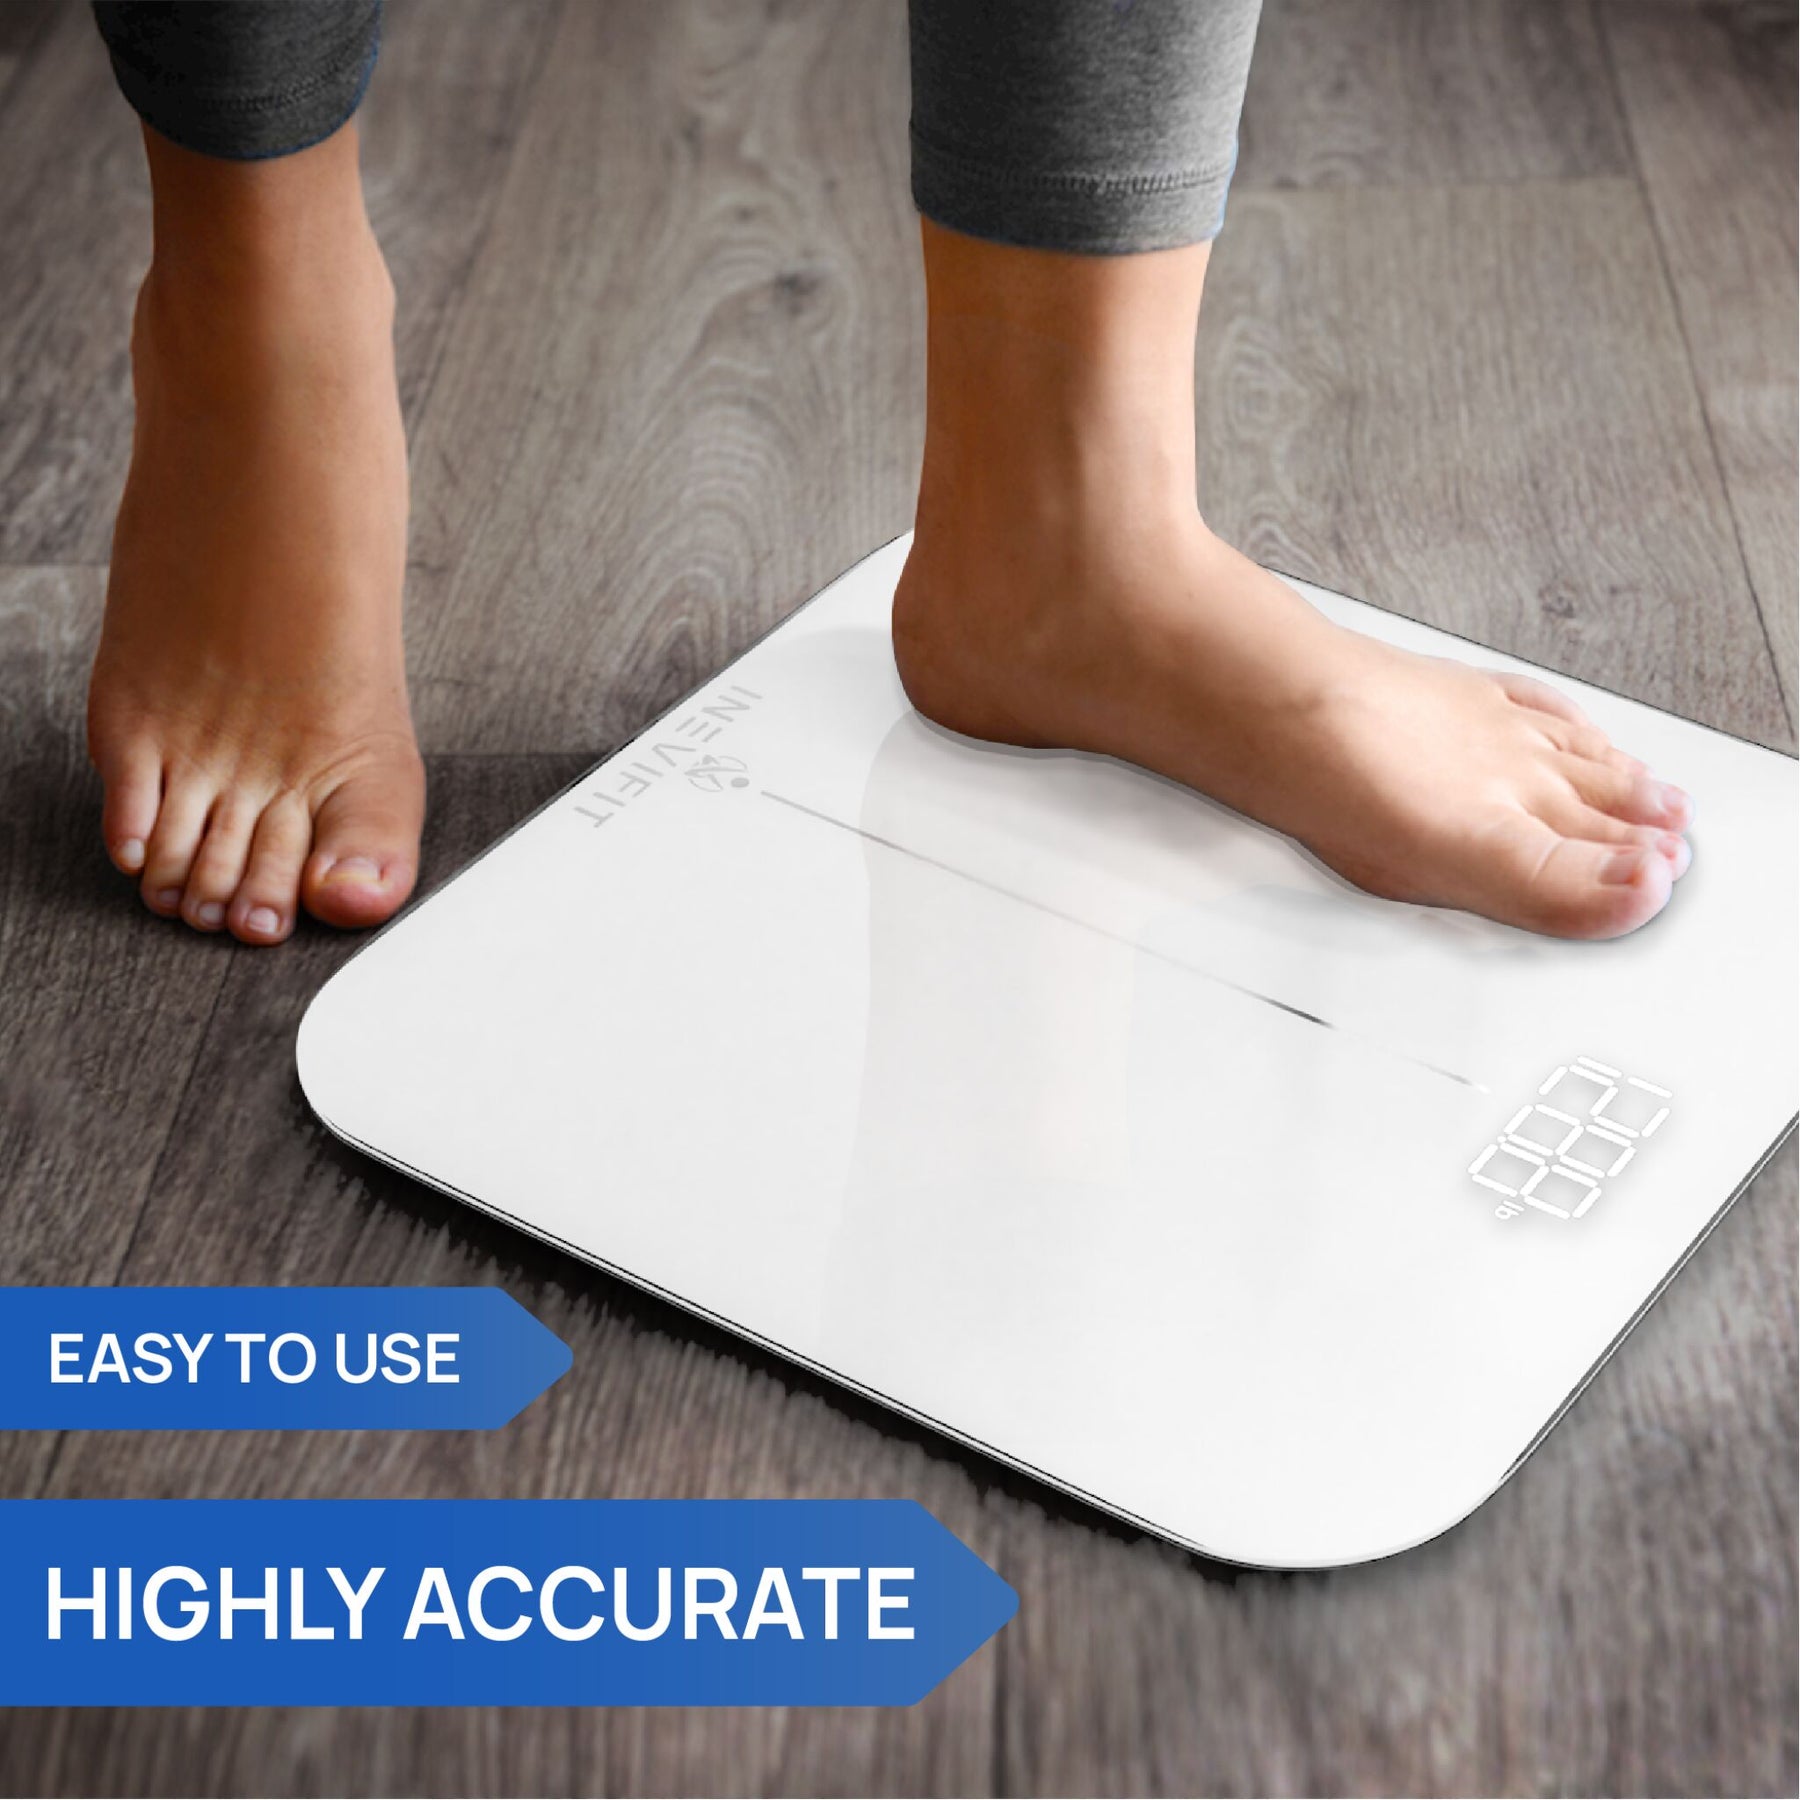 https://inevifit.com/cdn/shop/products/INEVIFIT-Body-Weight-Scale-I-BS005W-Highly-Accurate-LargePlatform-Size-4_1800x1800.jpg?v=1645123411